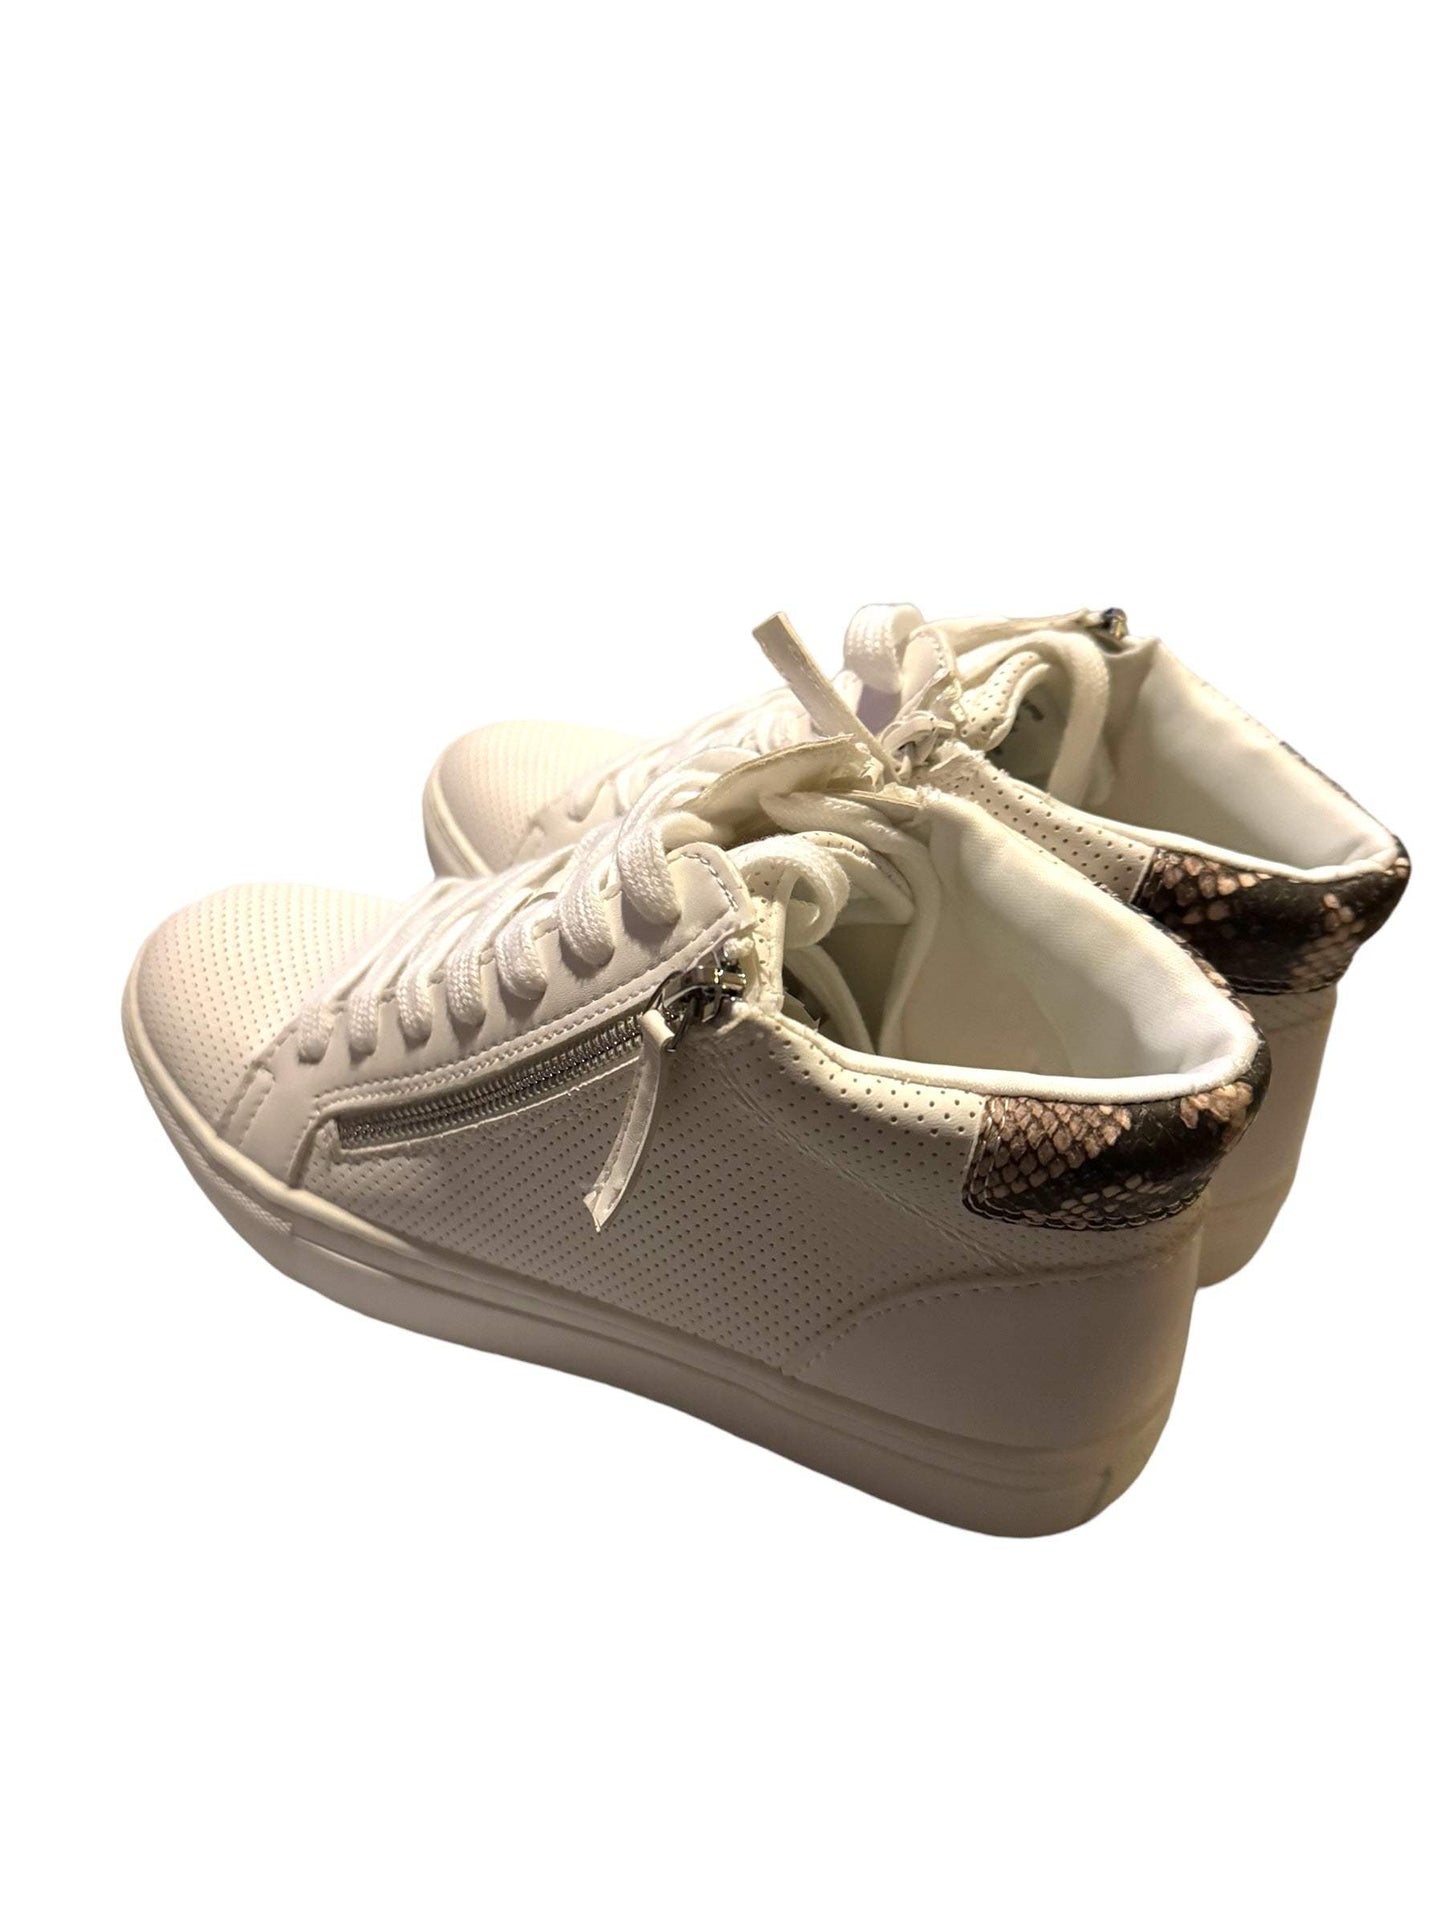 Universal Thread Brooklyn Lace Up Sneakers NEW Size 8.5 White - Selzalot